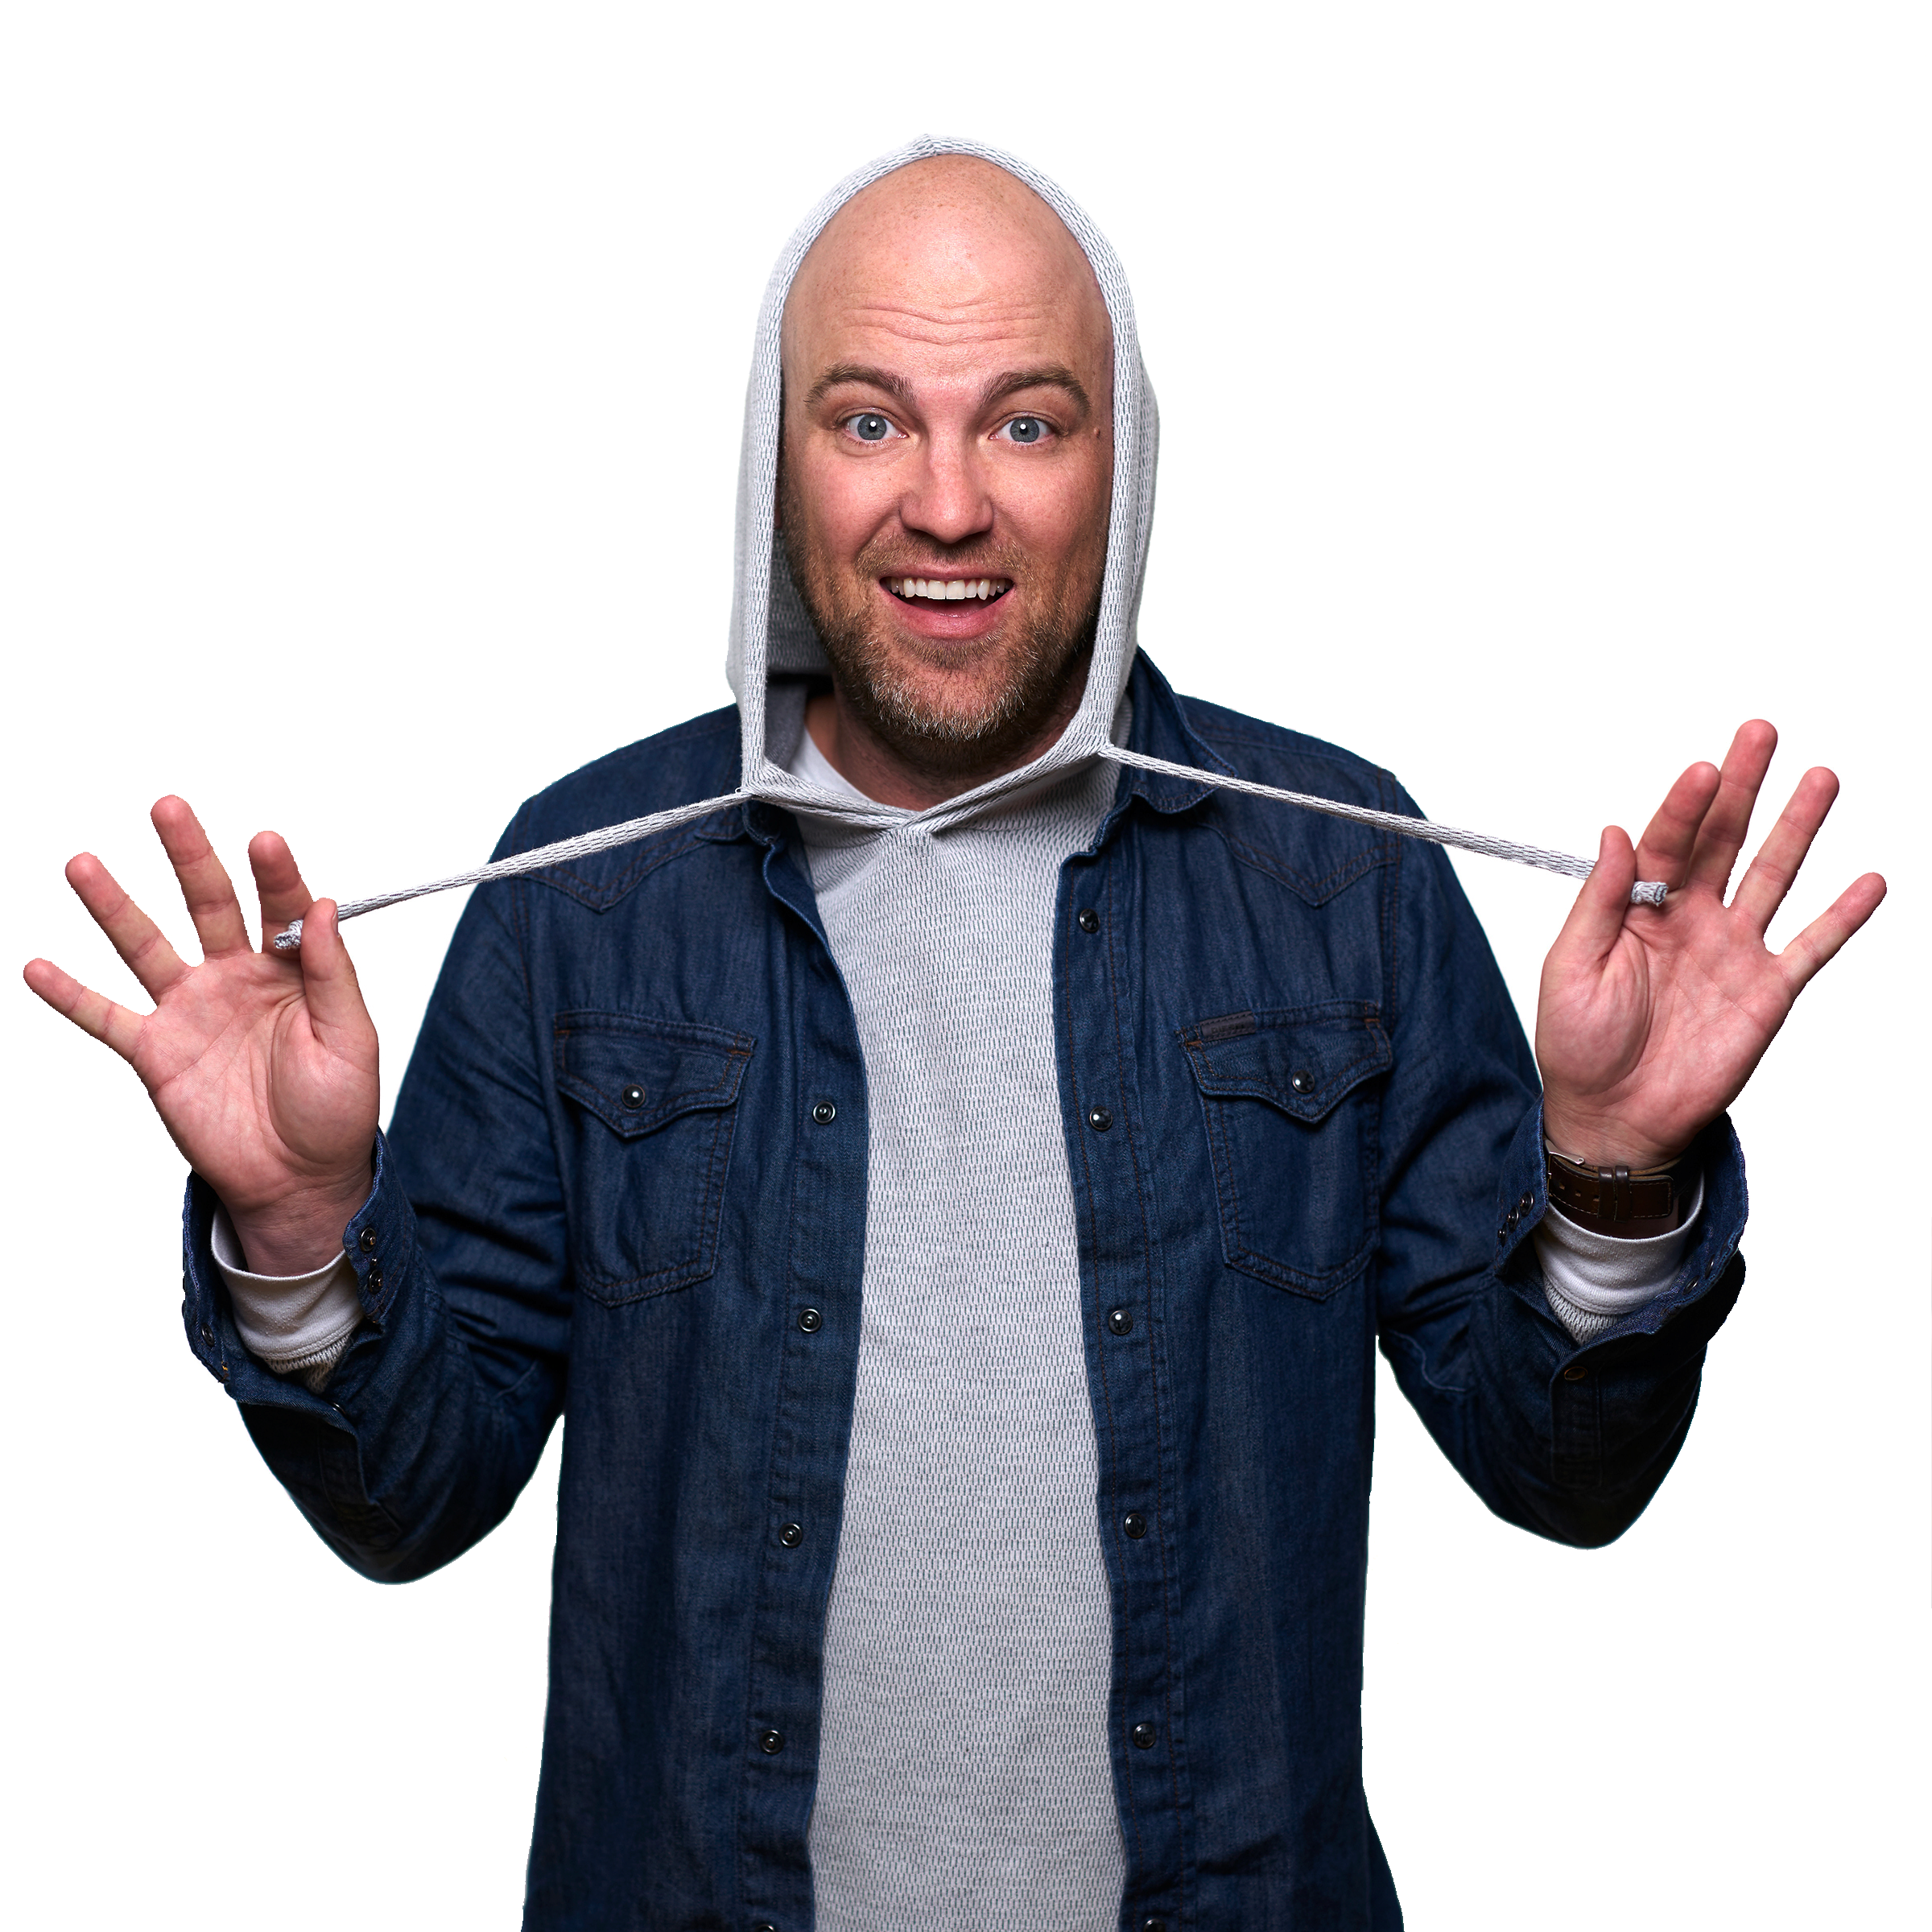 https://everettcomedy.com/wp-content/uploads/2015/12/String-Pull-Headshot-2400x2400.300dpi-no-background.png